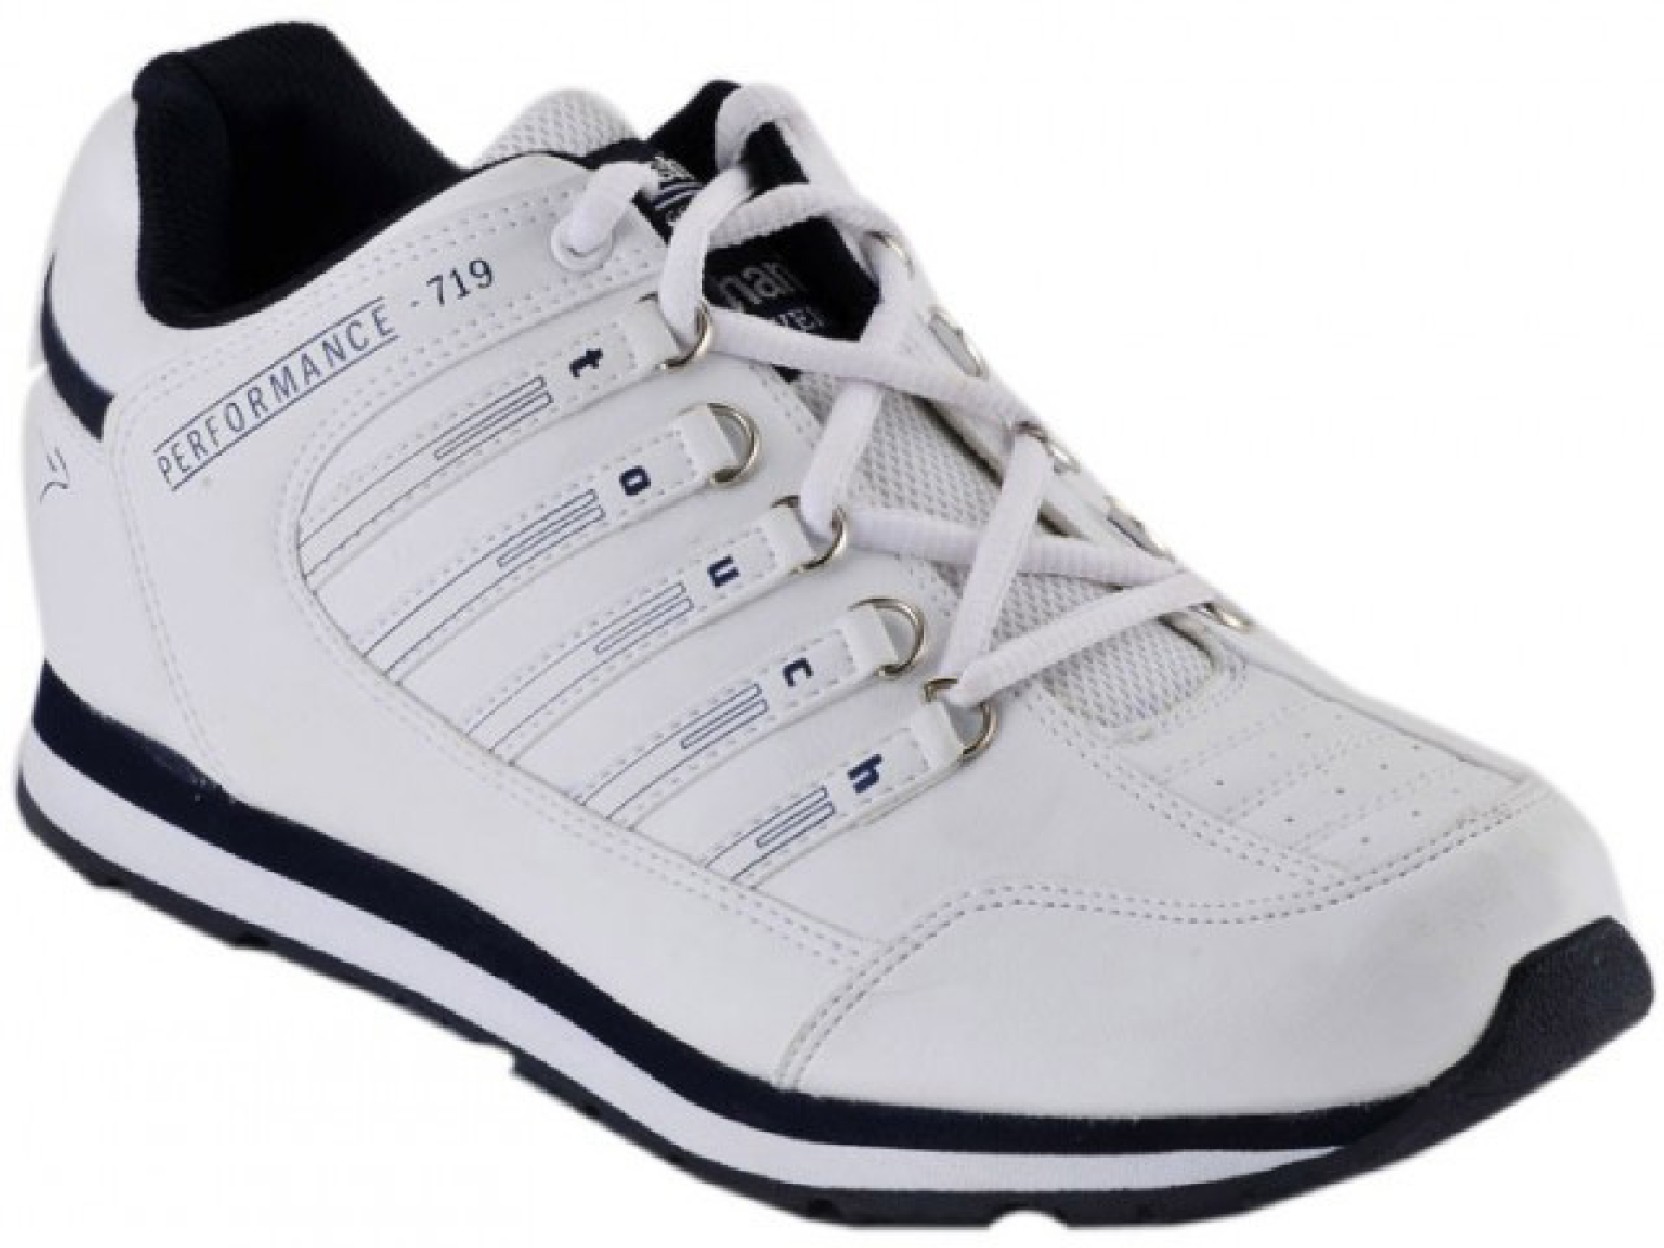 Lakhani Touch Running Shoes - Buy White1 Color Lakhani ...